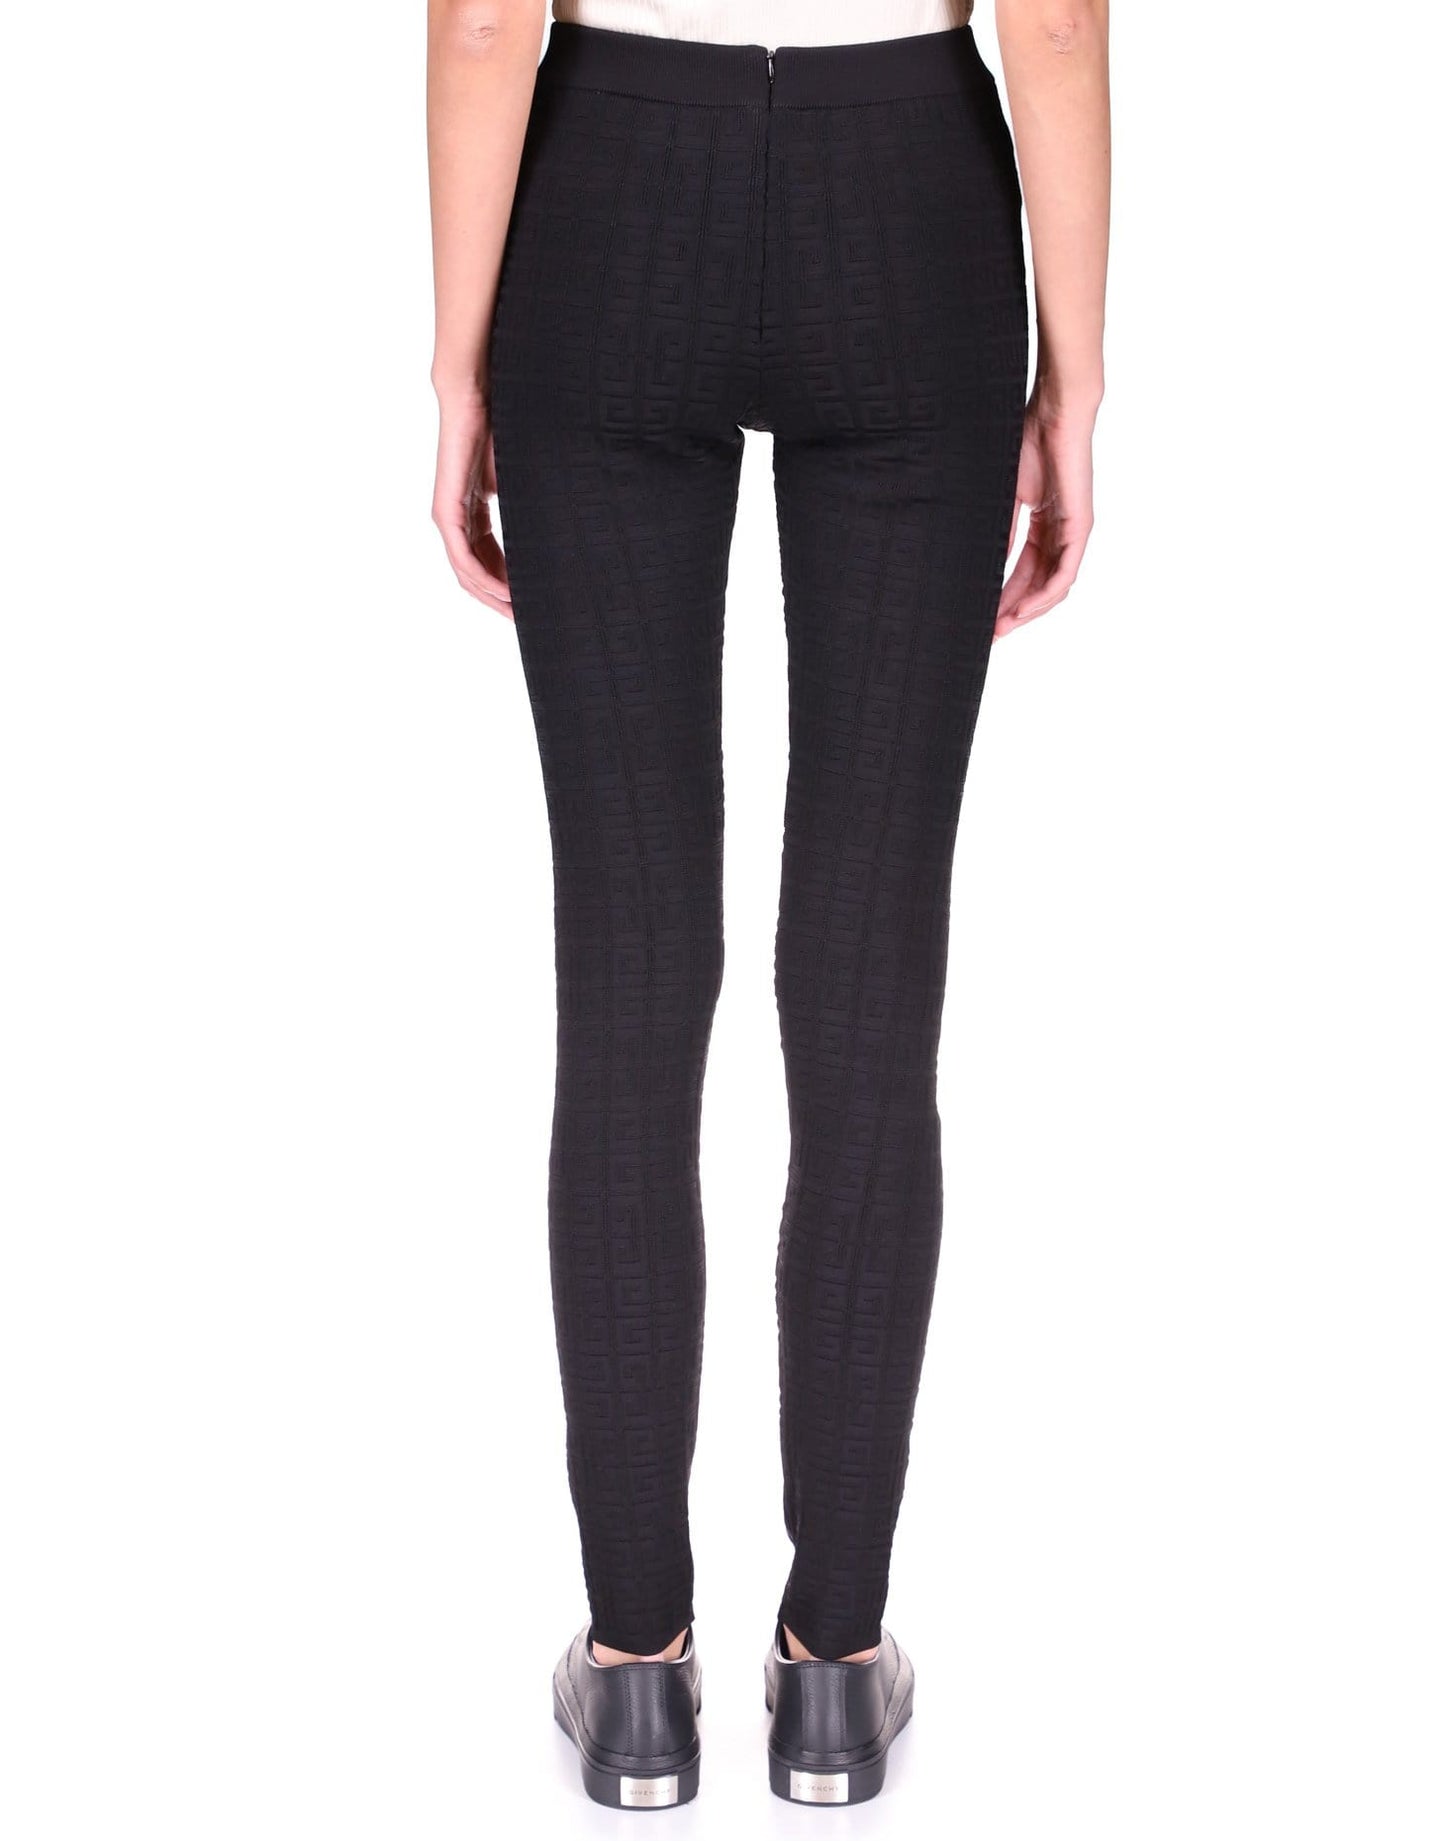 Women's Jacquard 4g Leggings by Givenchy